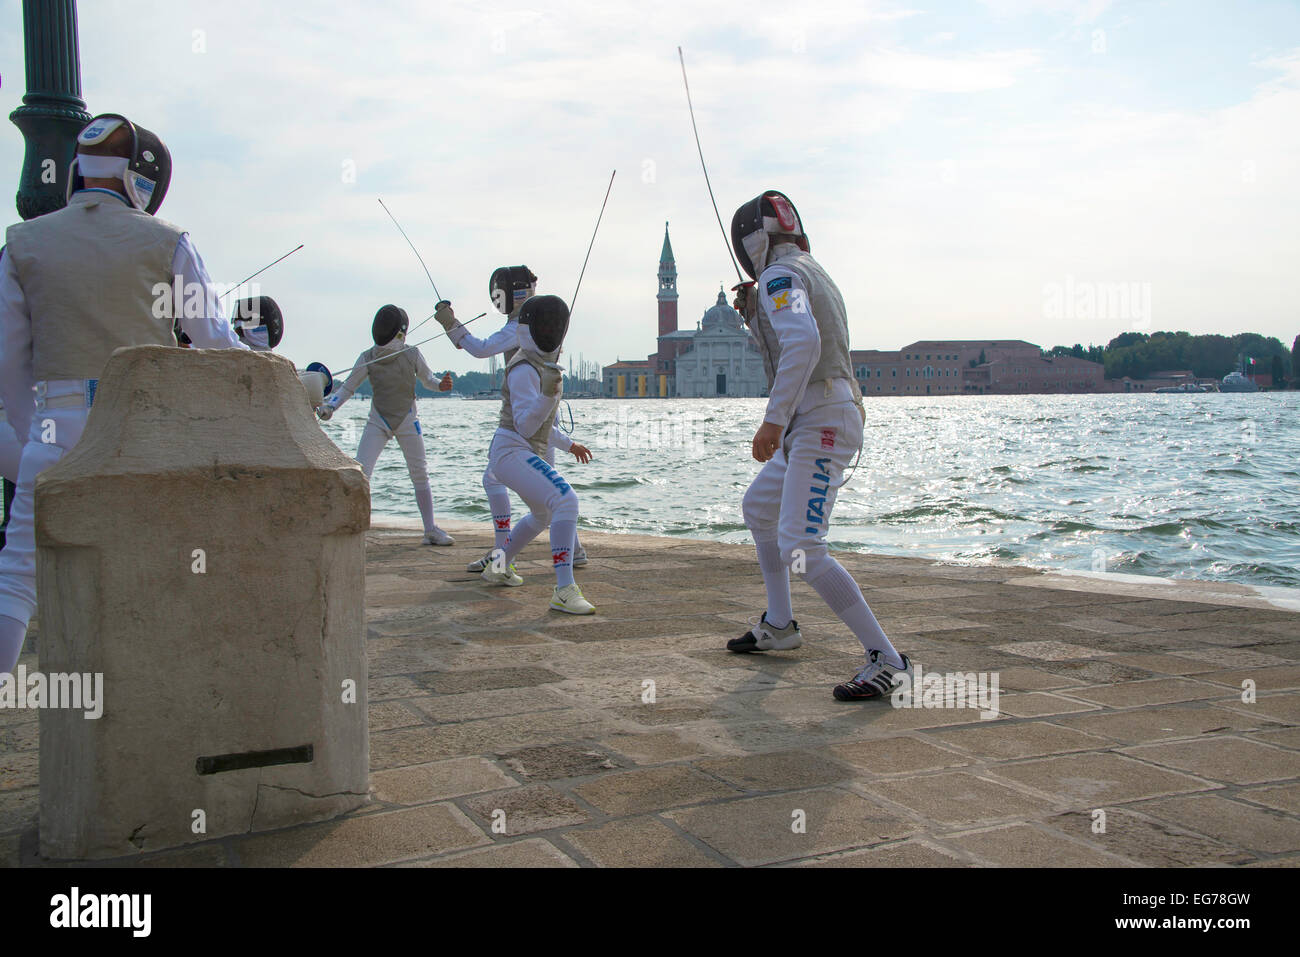 Foil Fencing at Dogana on Grand Canal Venice Stock Photo